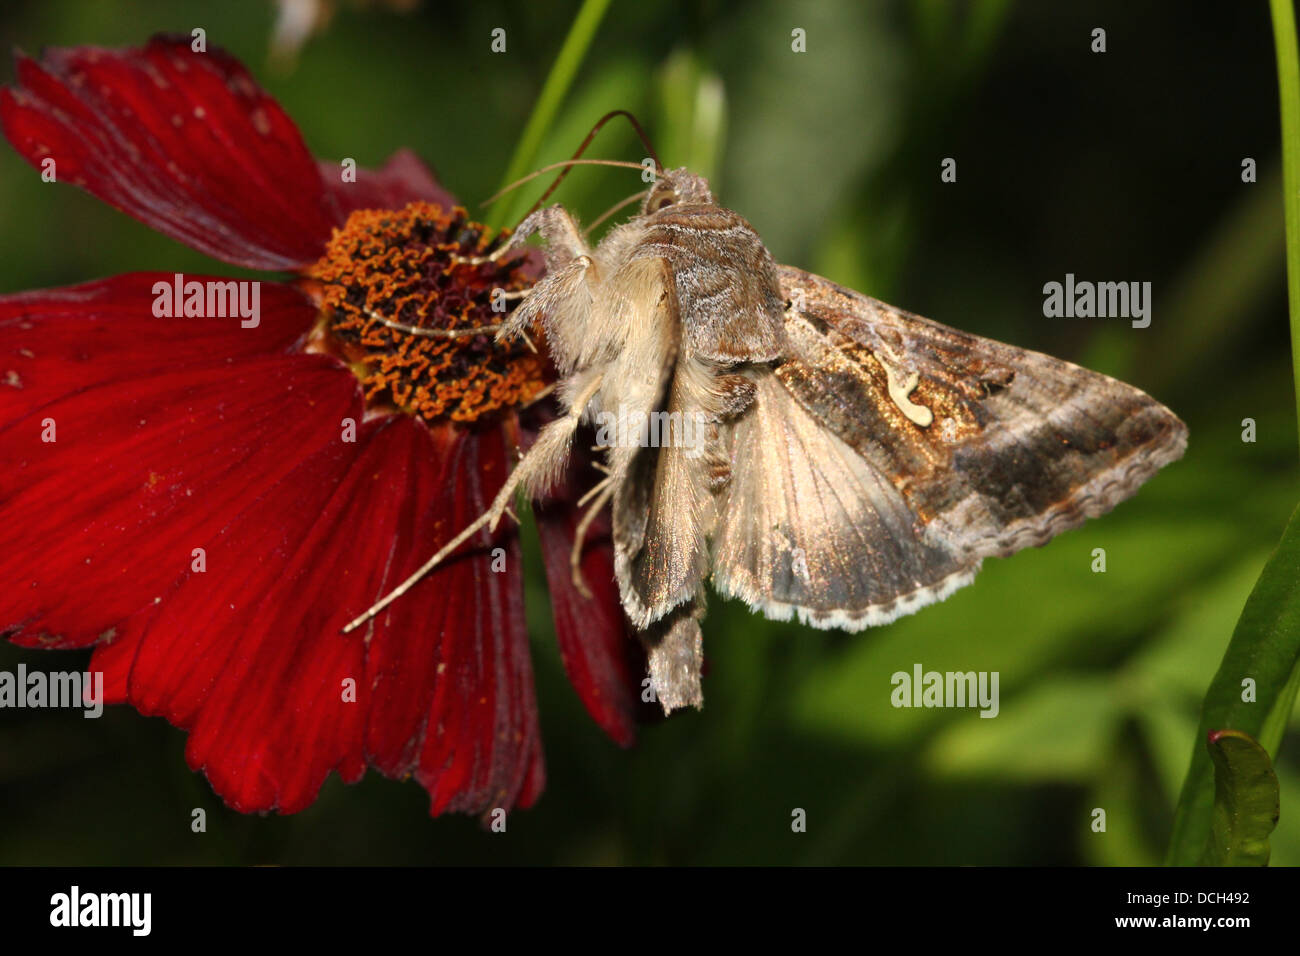 Silver Y (Autographa gamma) Moth on an impressive array of more than 15 different colourful flowers  (100+ images in series) Stock Photo